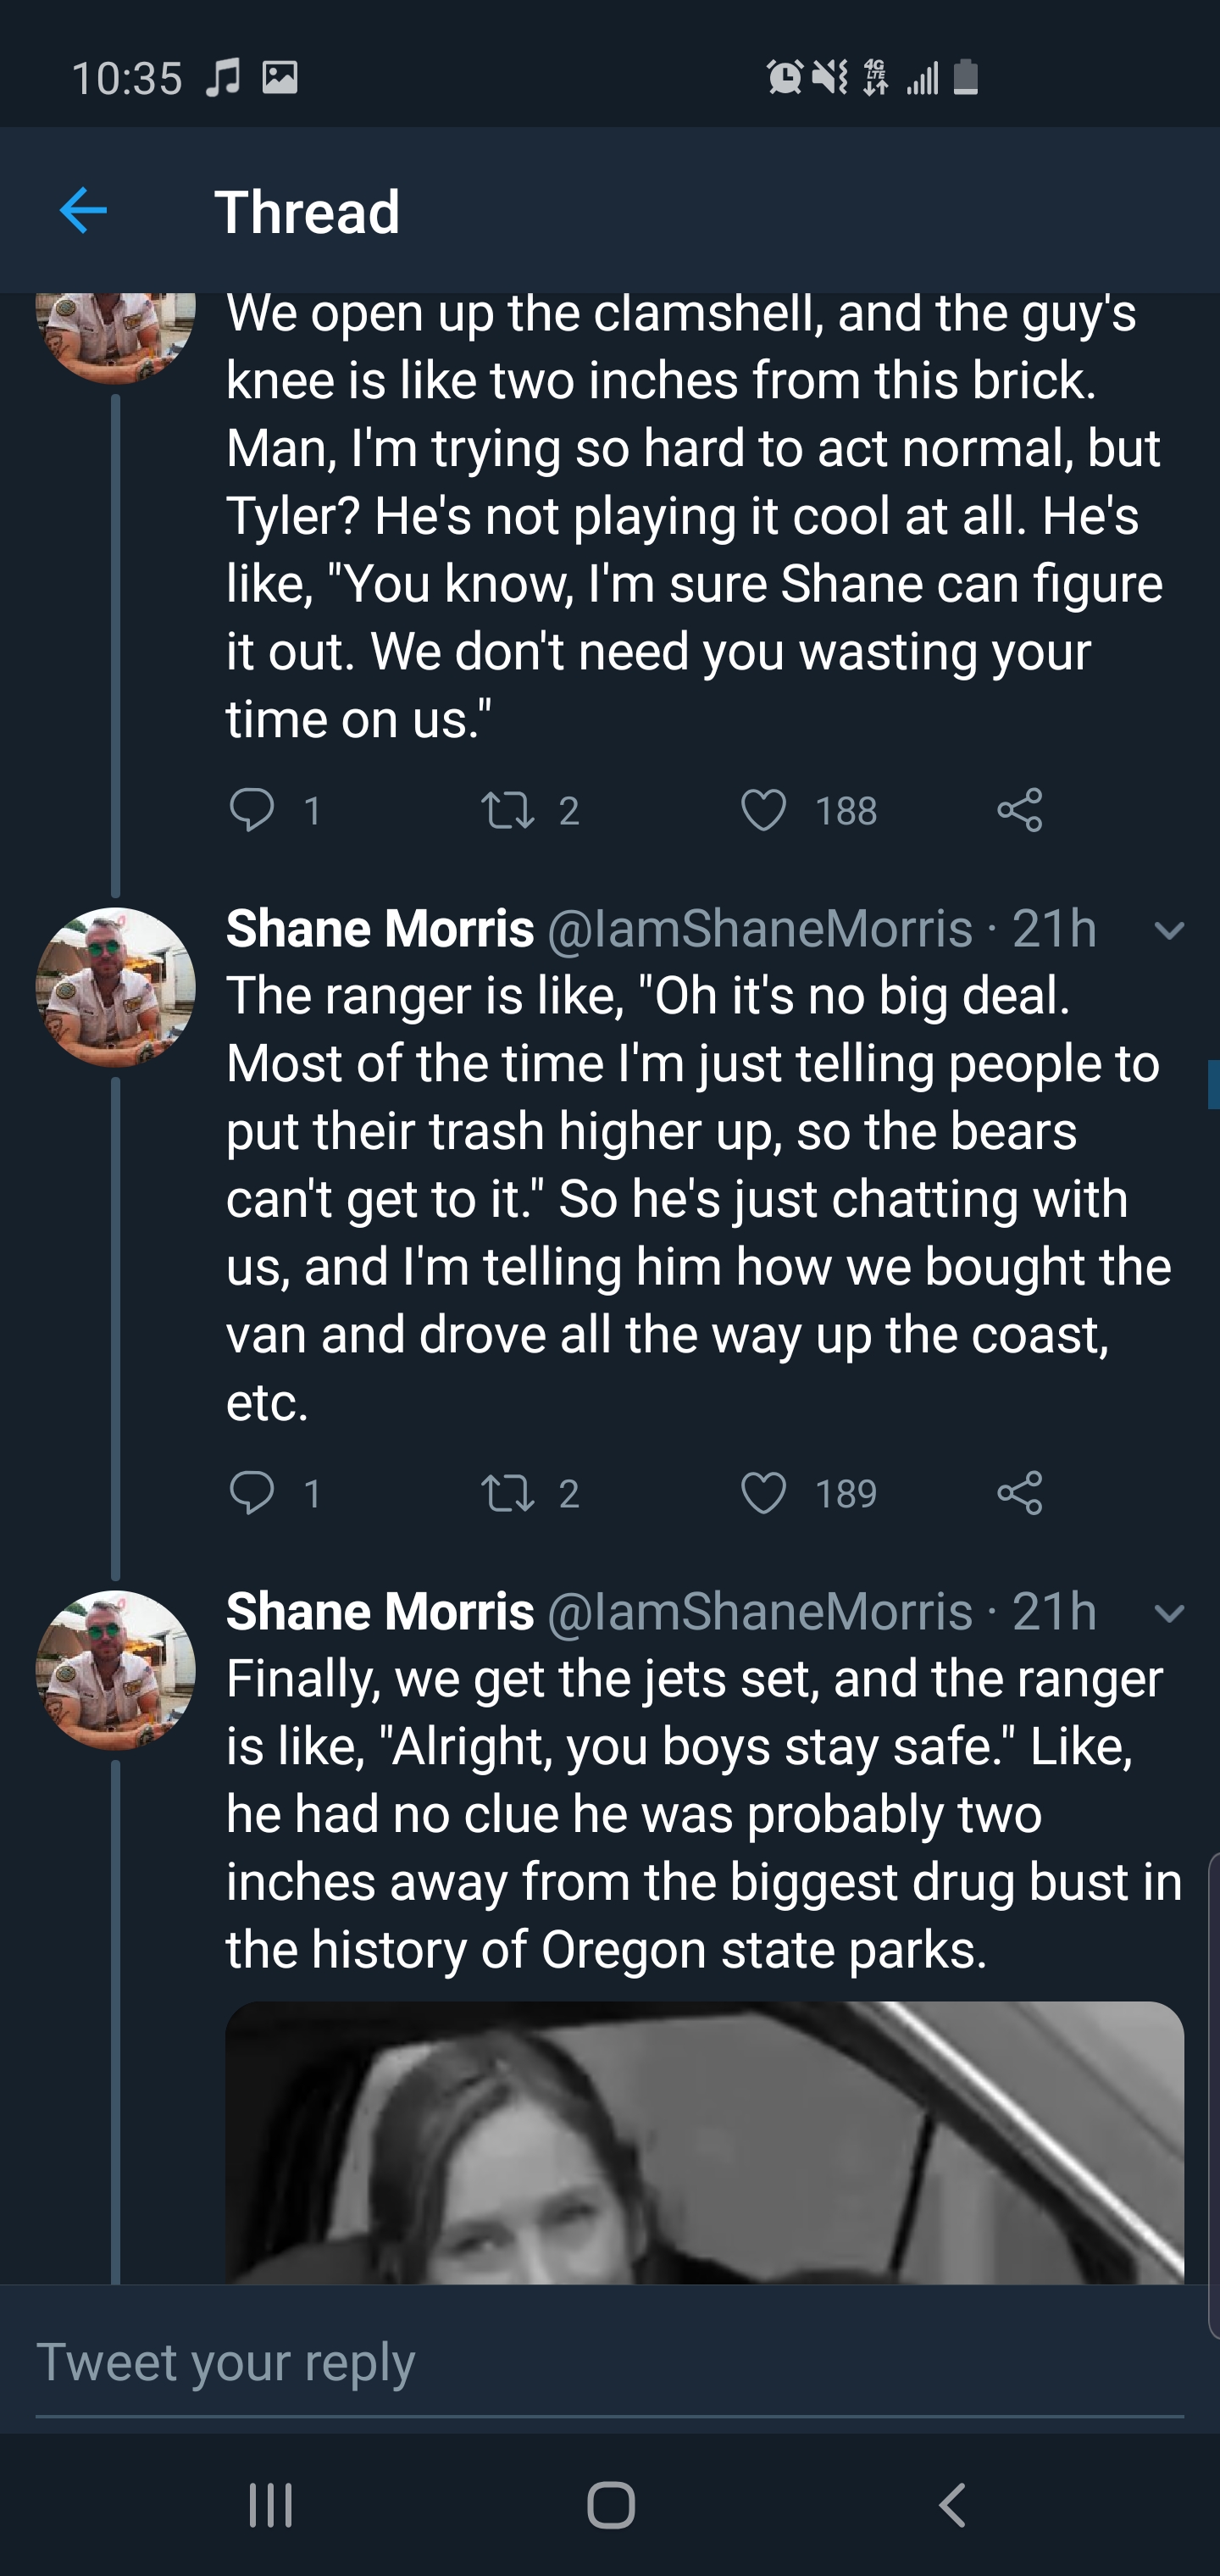 screenshot - 15 Ona A Thread We open up the clamshell, and the guy's knee is two inches from this brick. Man, I'm trying so hard to act normal, but Tyler? He's not playing it cool at all. He's , "You know, I'm sure Shane can figure it out. We don't need y